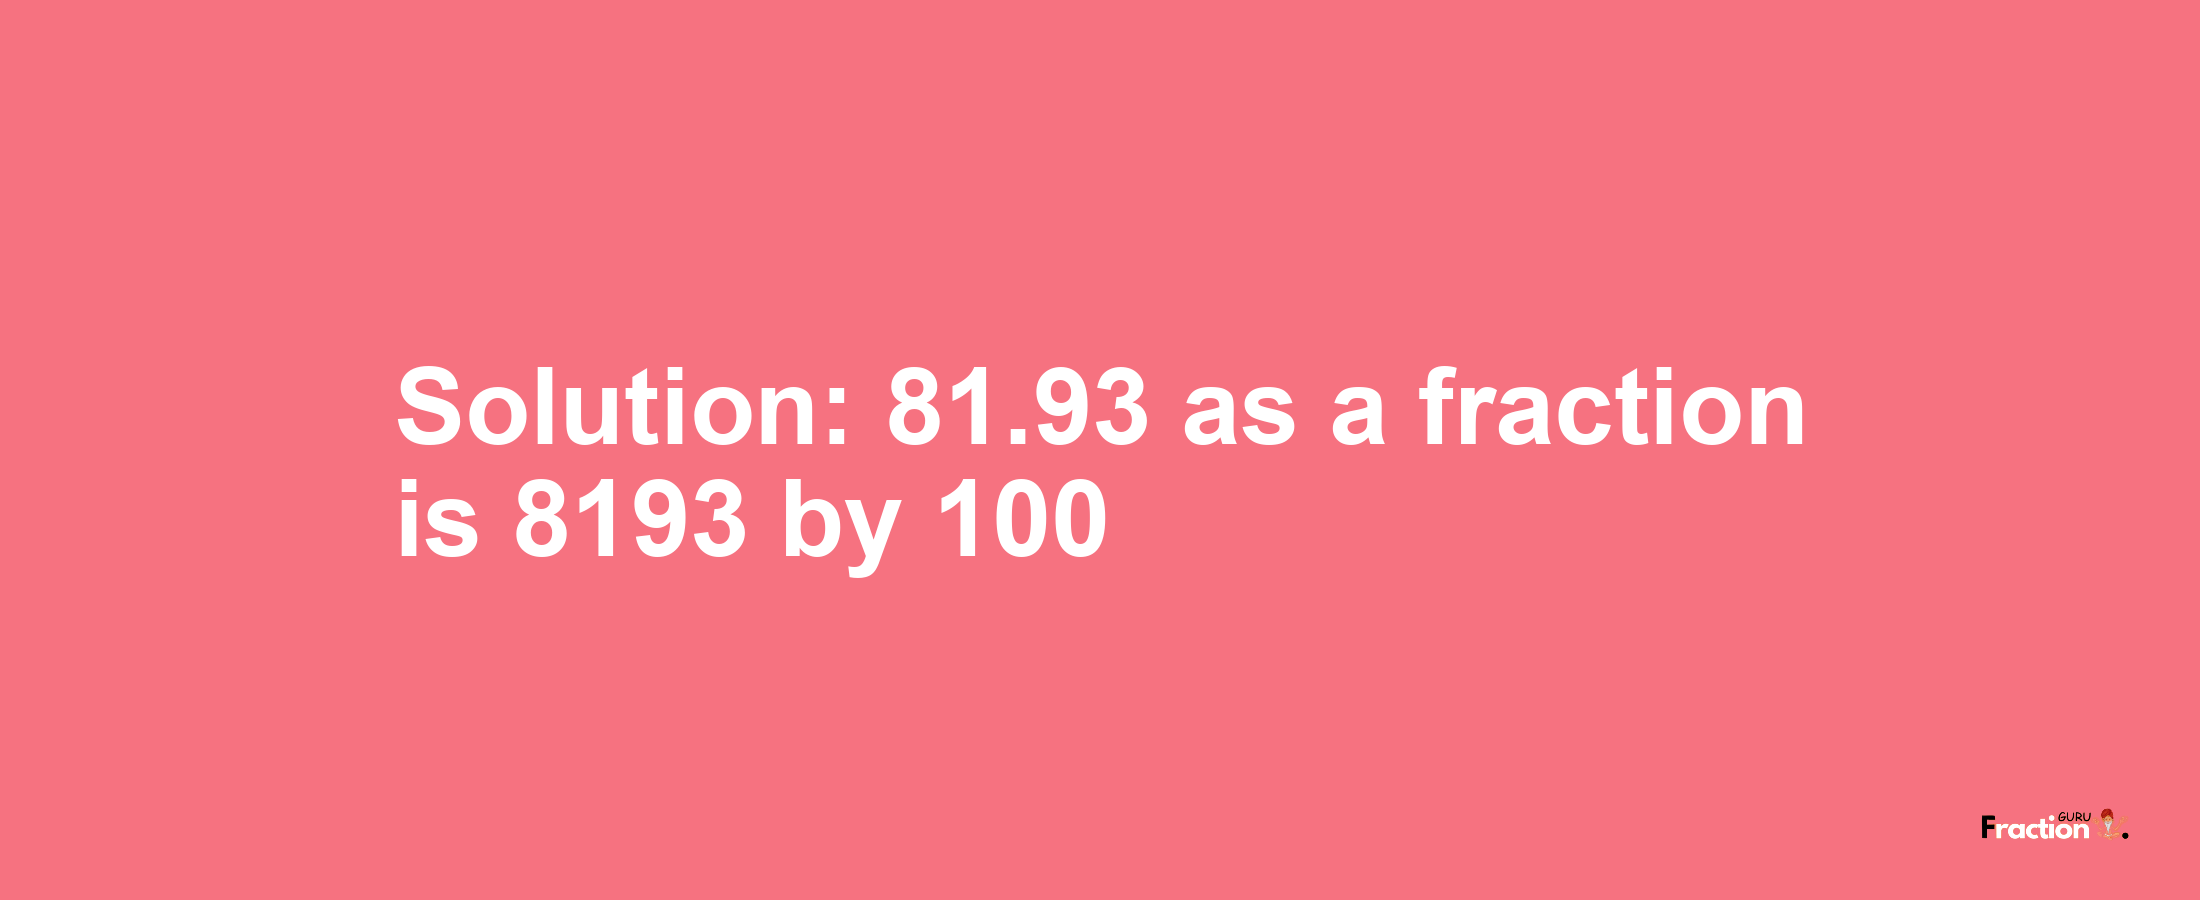 Solution:81.93 as a fraction is 8193/100